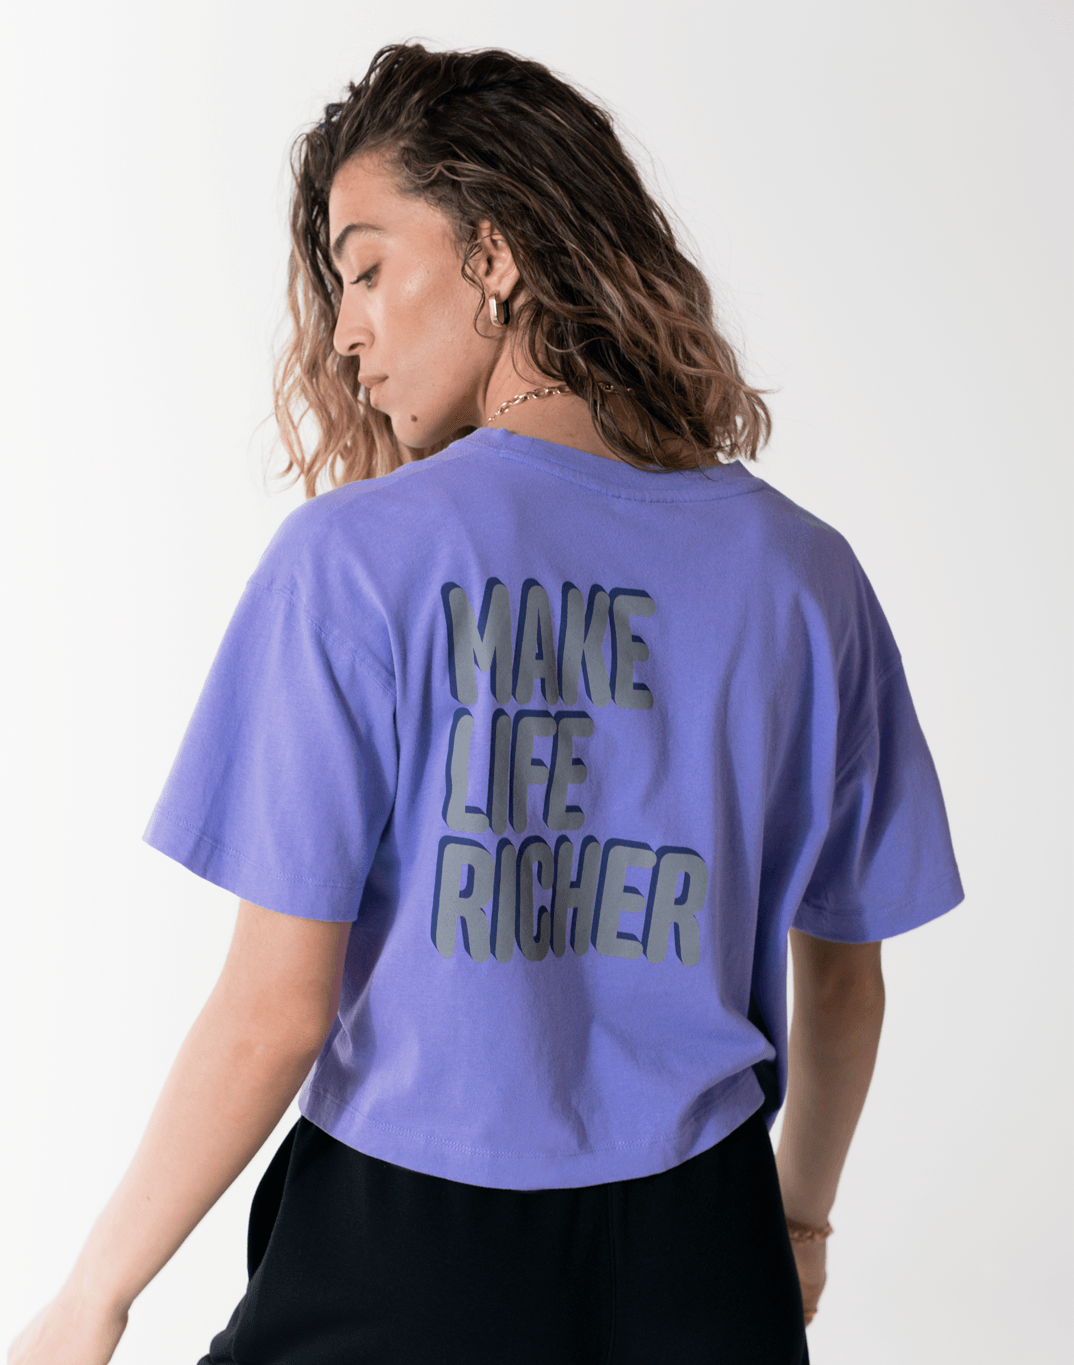 Kinney Tee in Lavender - T-Shirts - Gym+Coffee